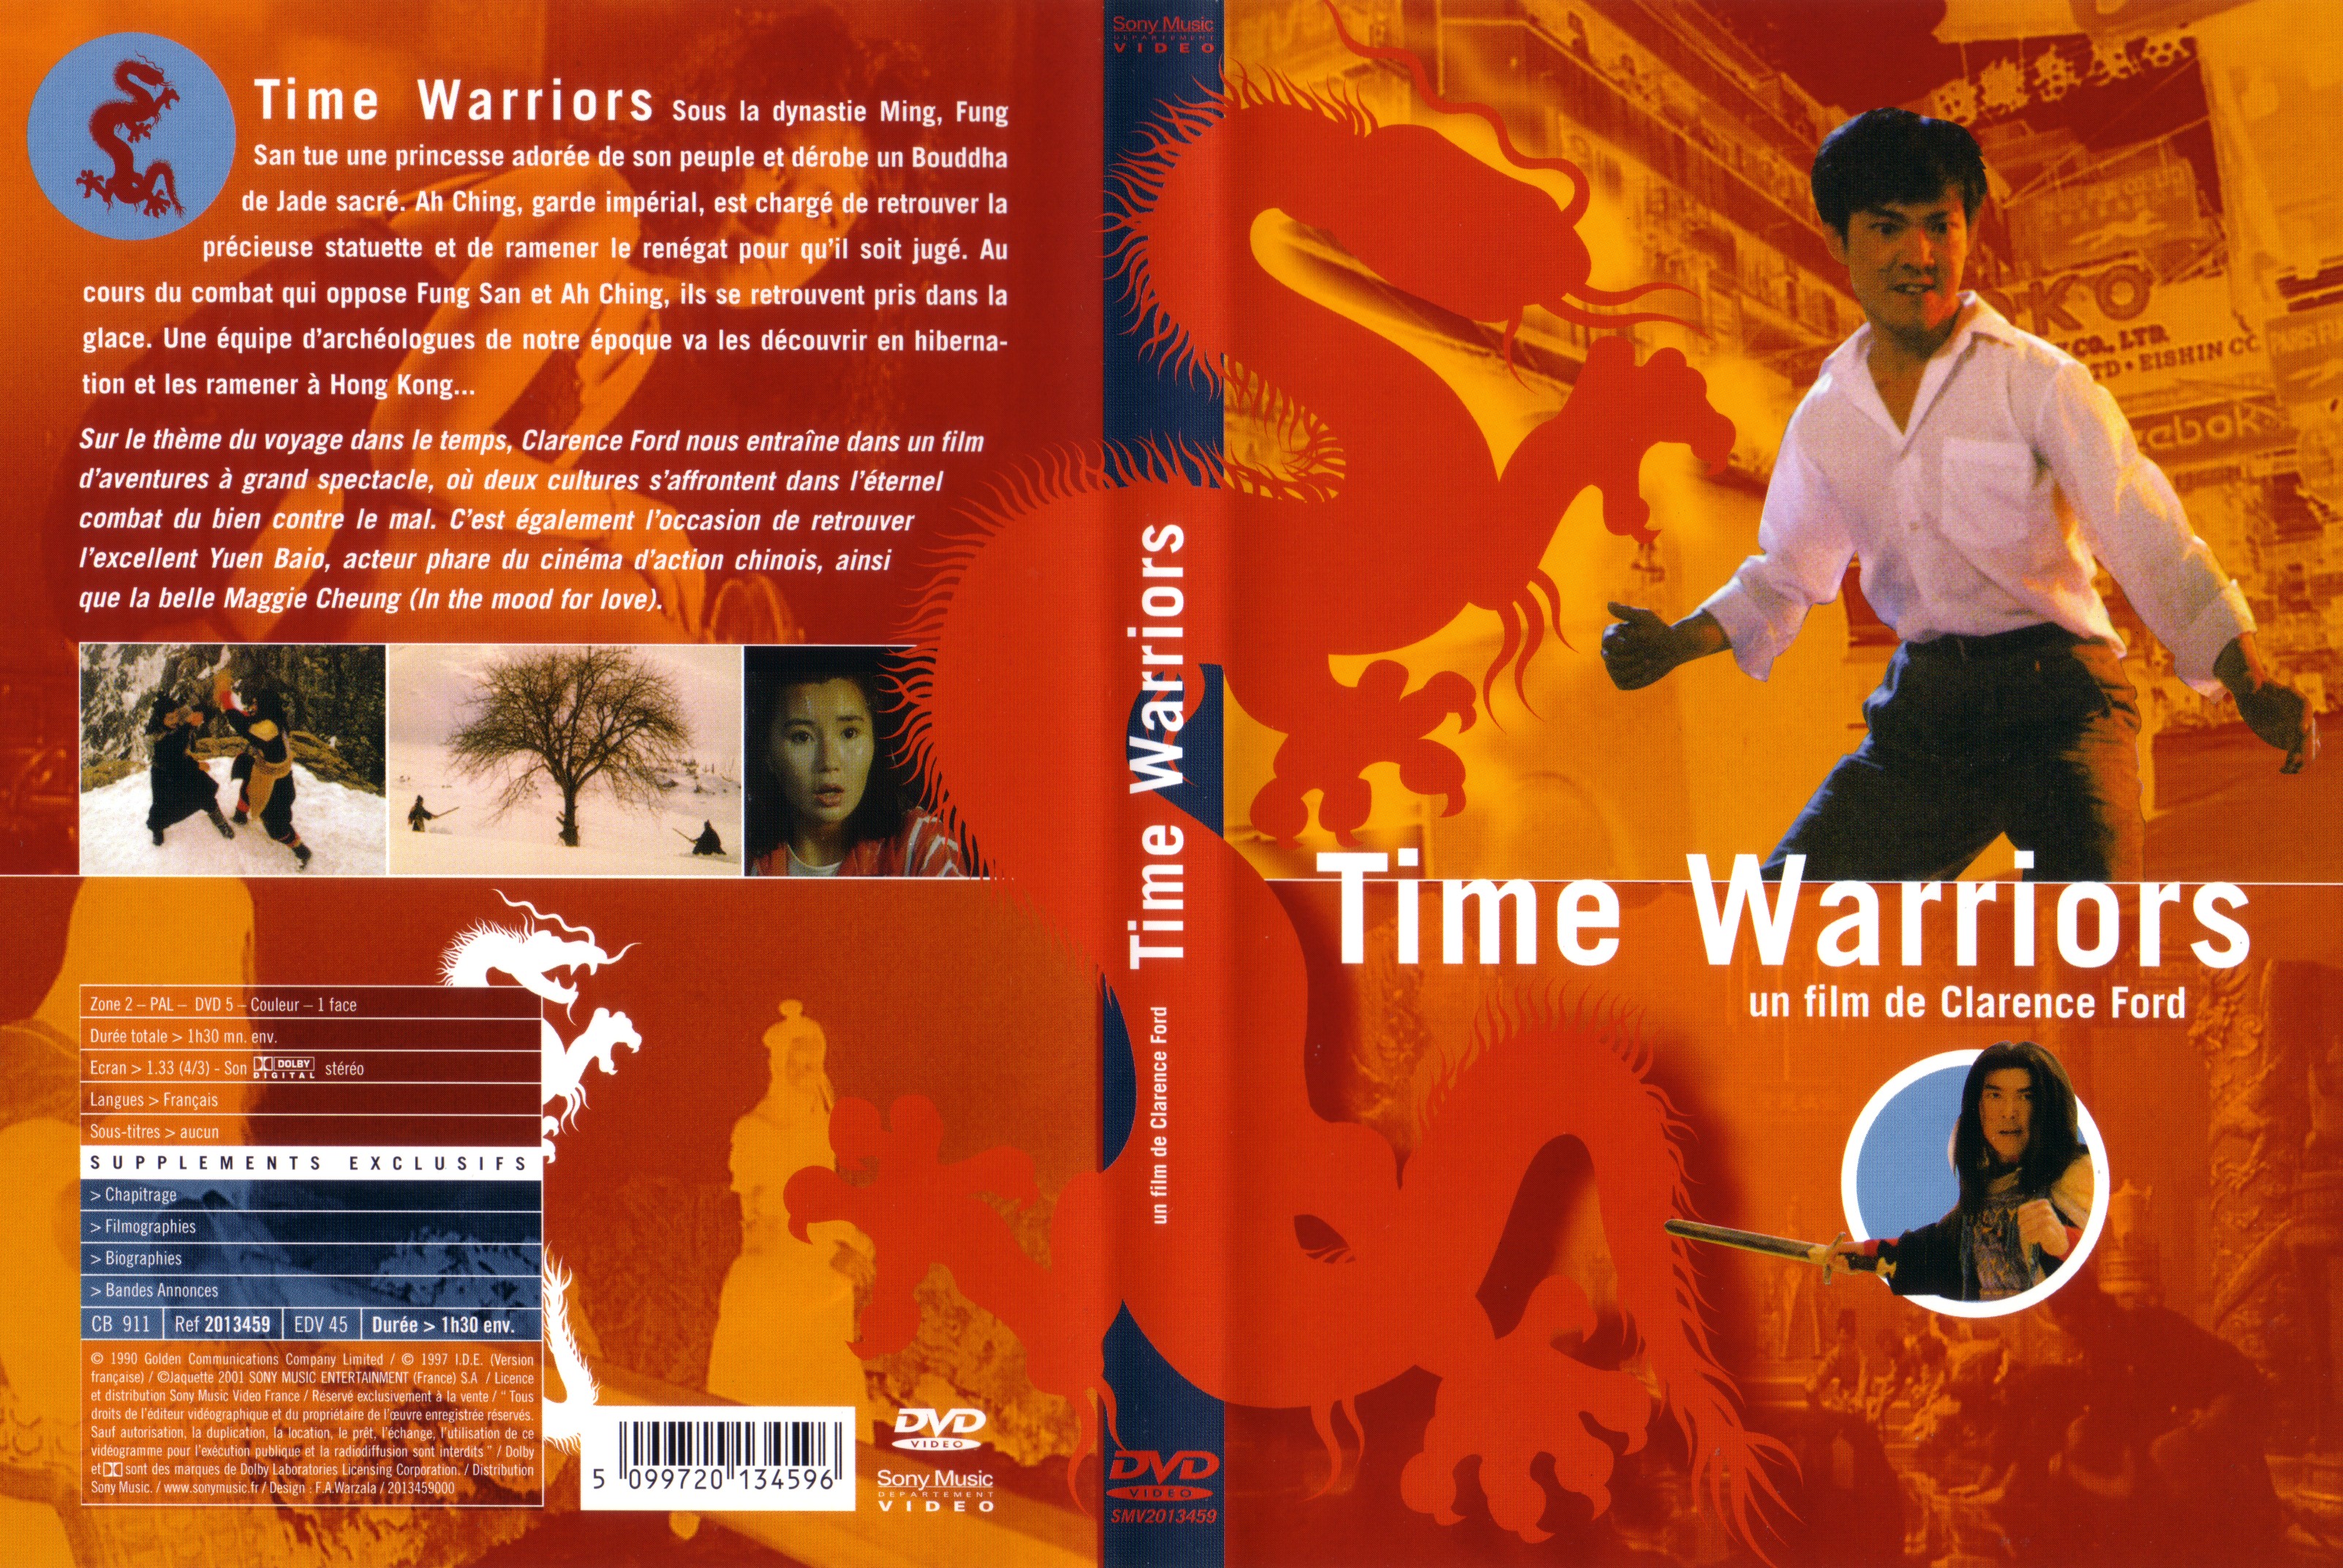 Jaquette DVD Time warriors